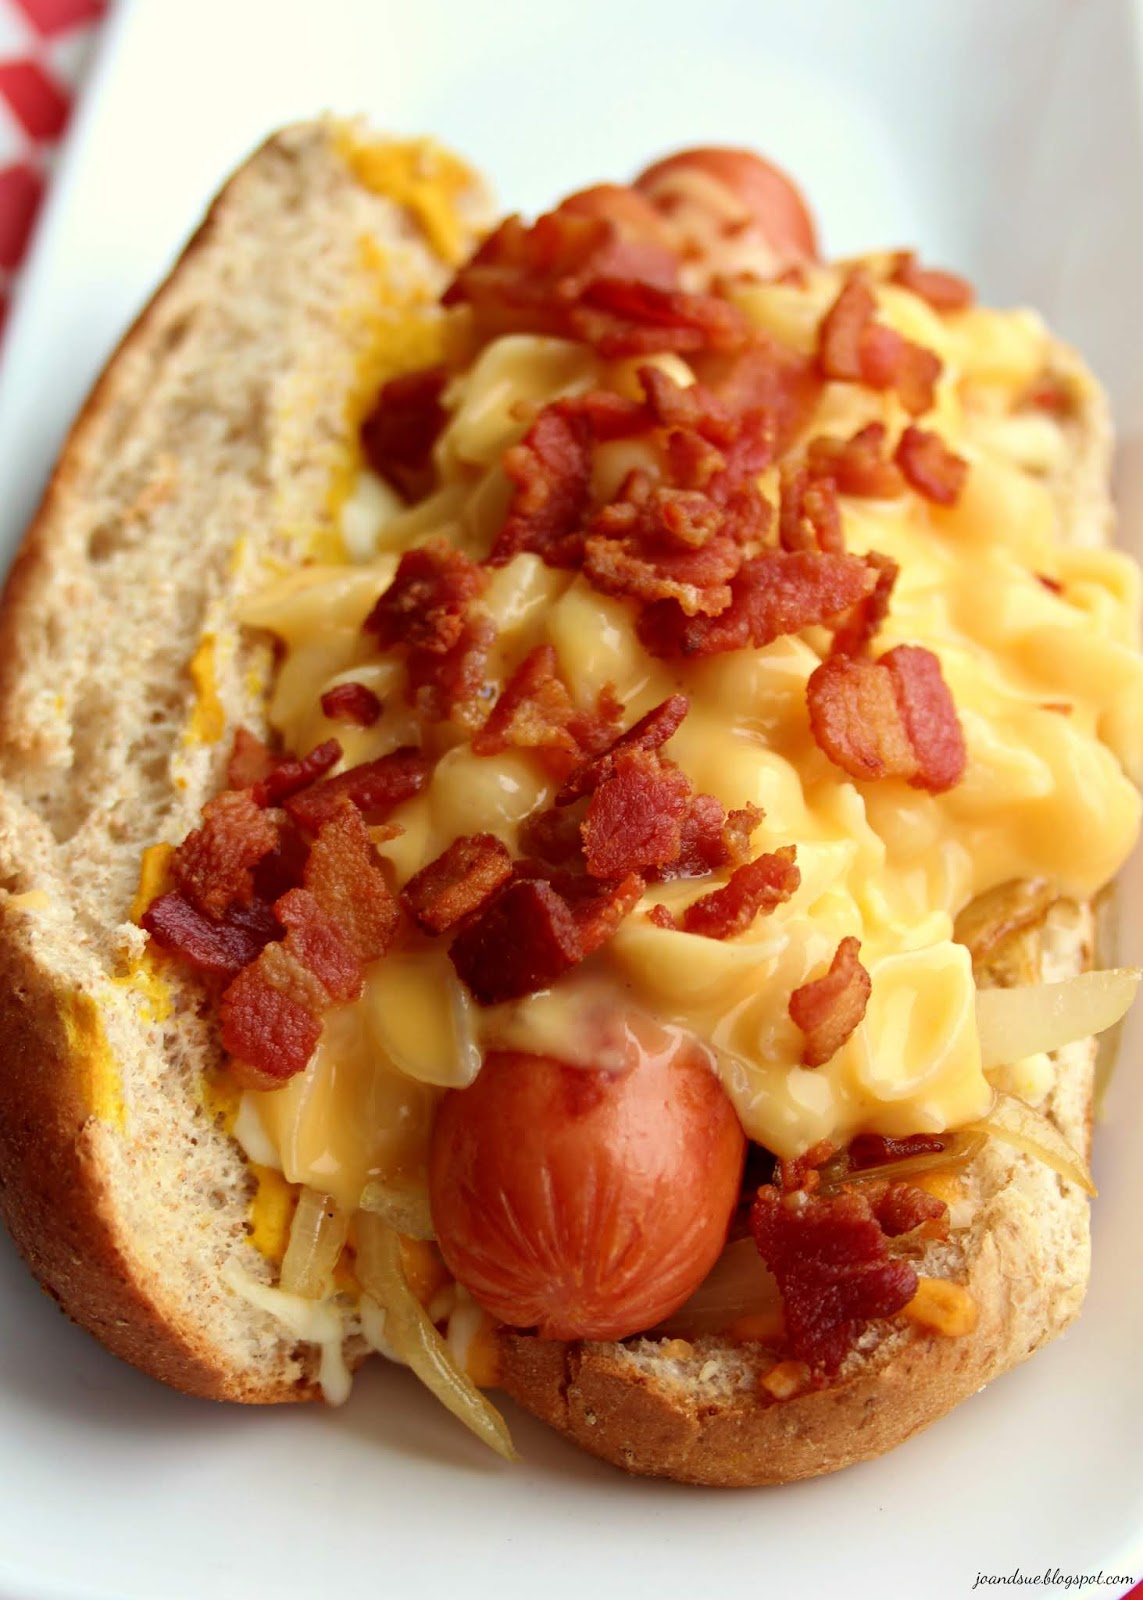 Jo and Sue: Mac and Cheese Hot Dog with Bacon